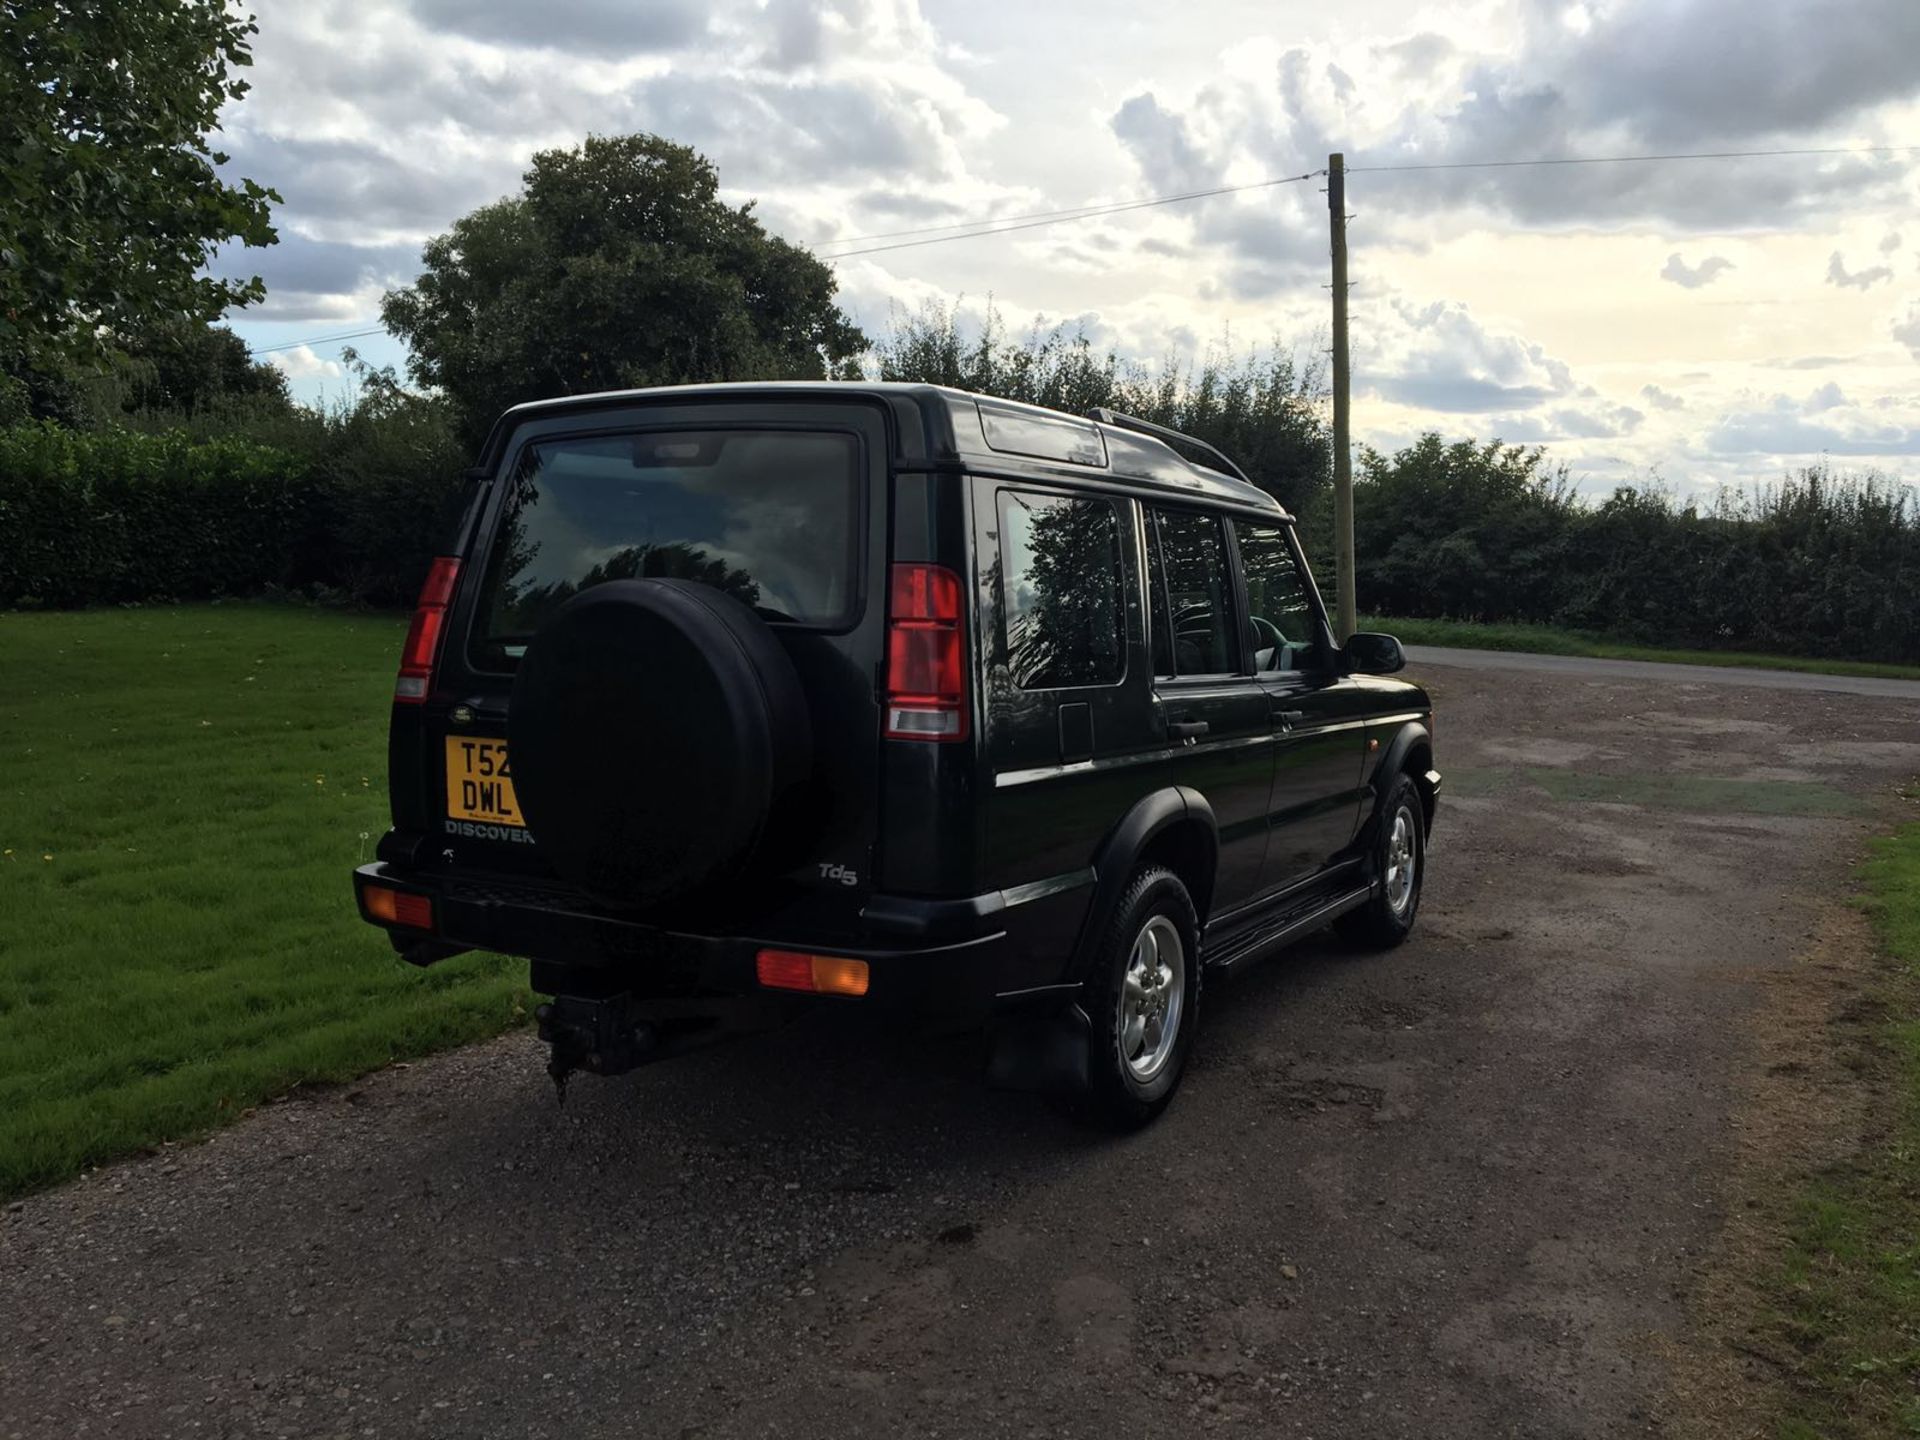 1999 REG LAND ROVER DISCOVERY GREEN, NEW ENGINE FITTED NOT LONG AGO AND COMES WITH NEW MOT *NO VAT* - Image 5 of 10